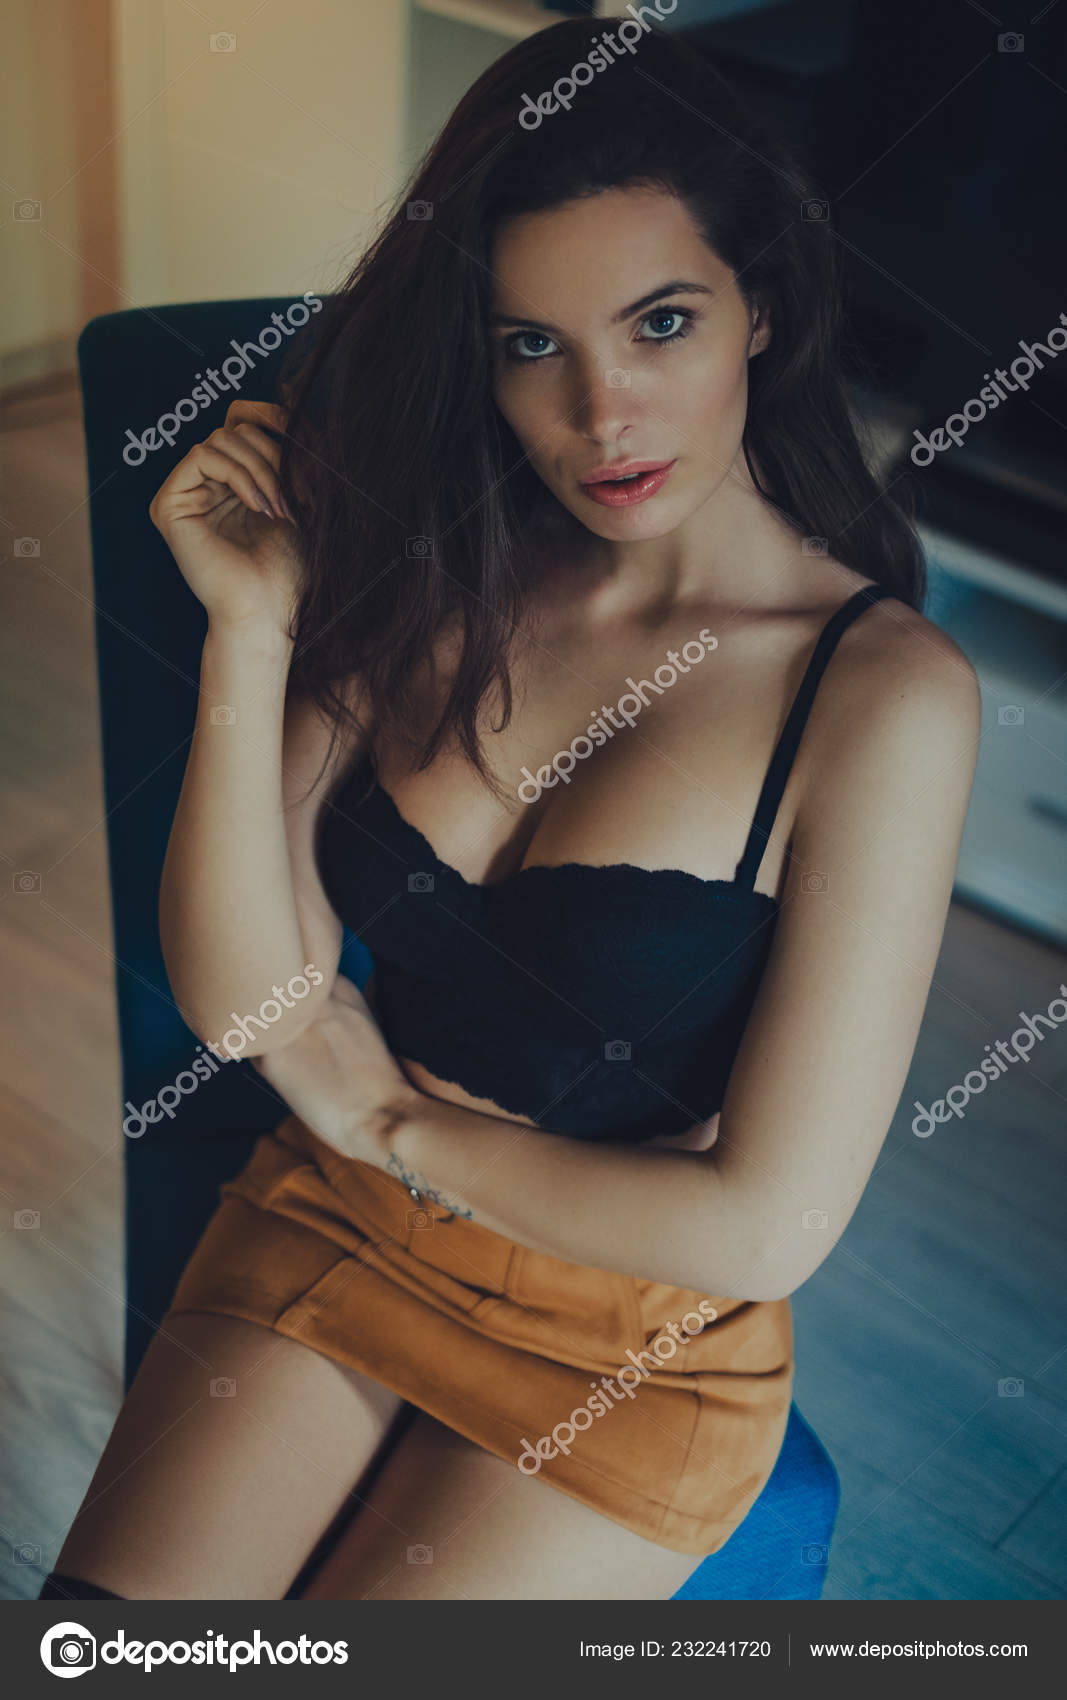 Sexy girl in bra and skirt sitting on a chair Stock Photo by